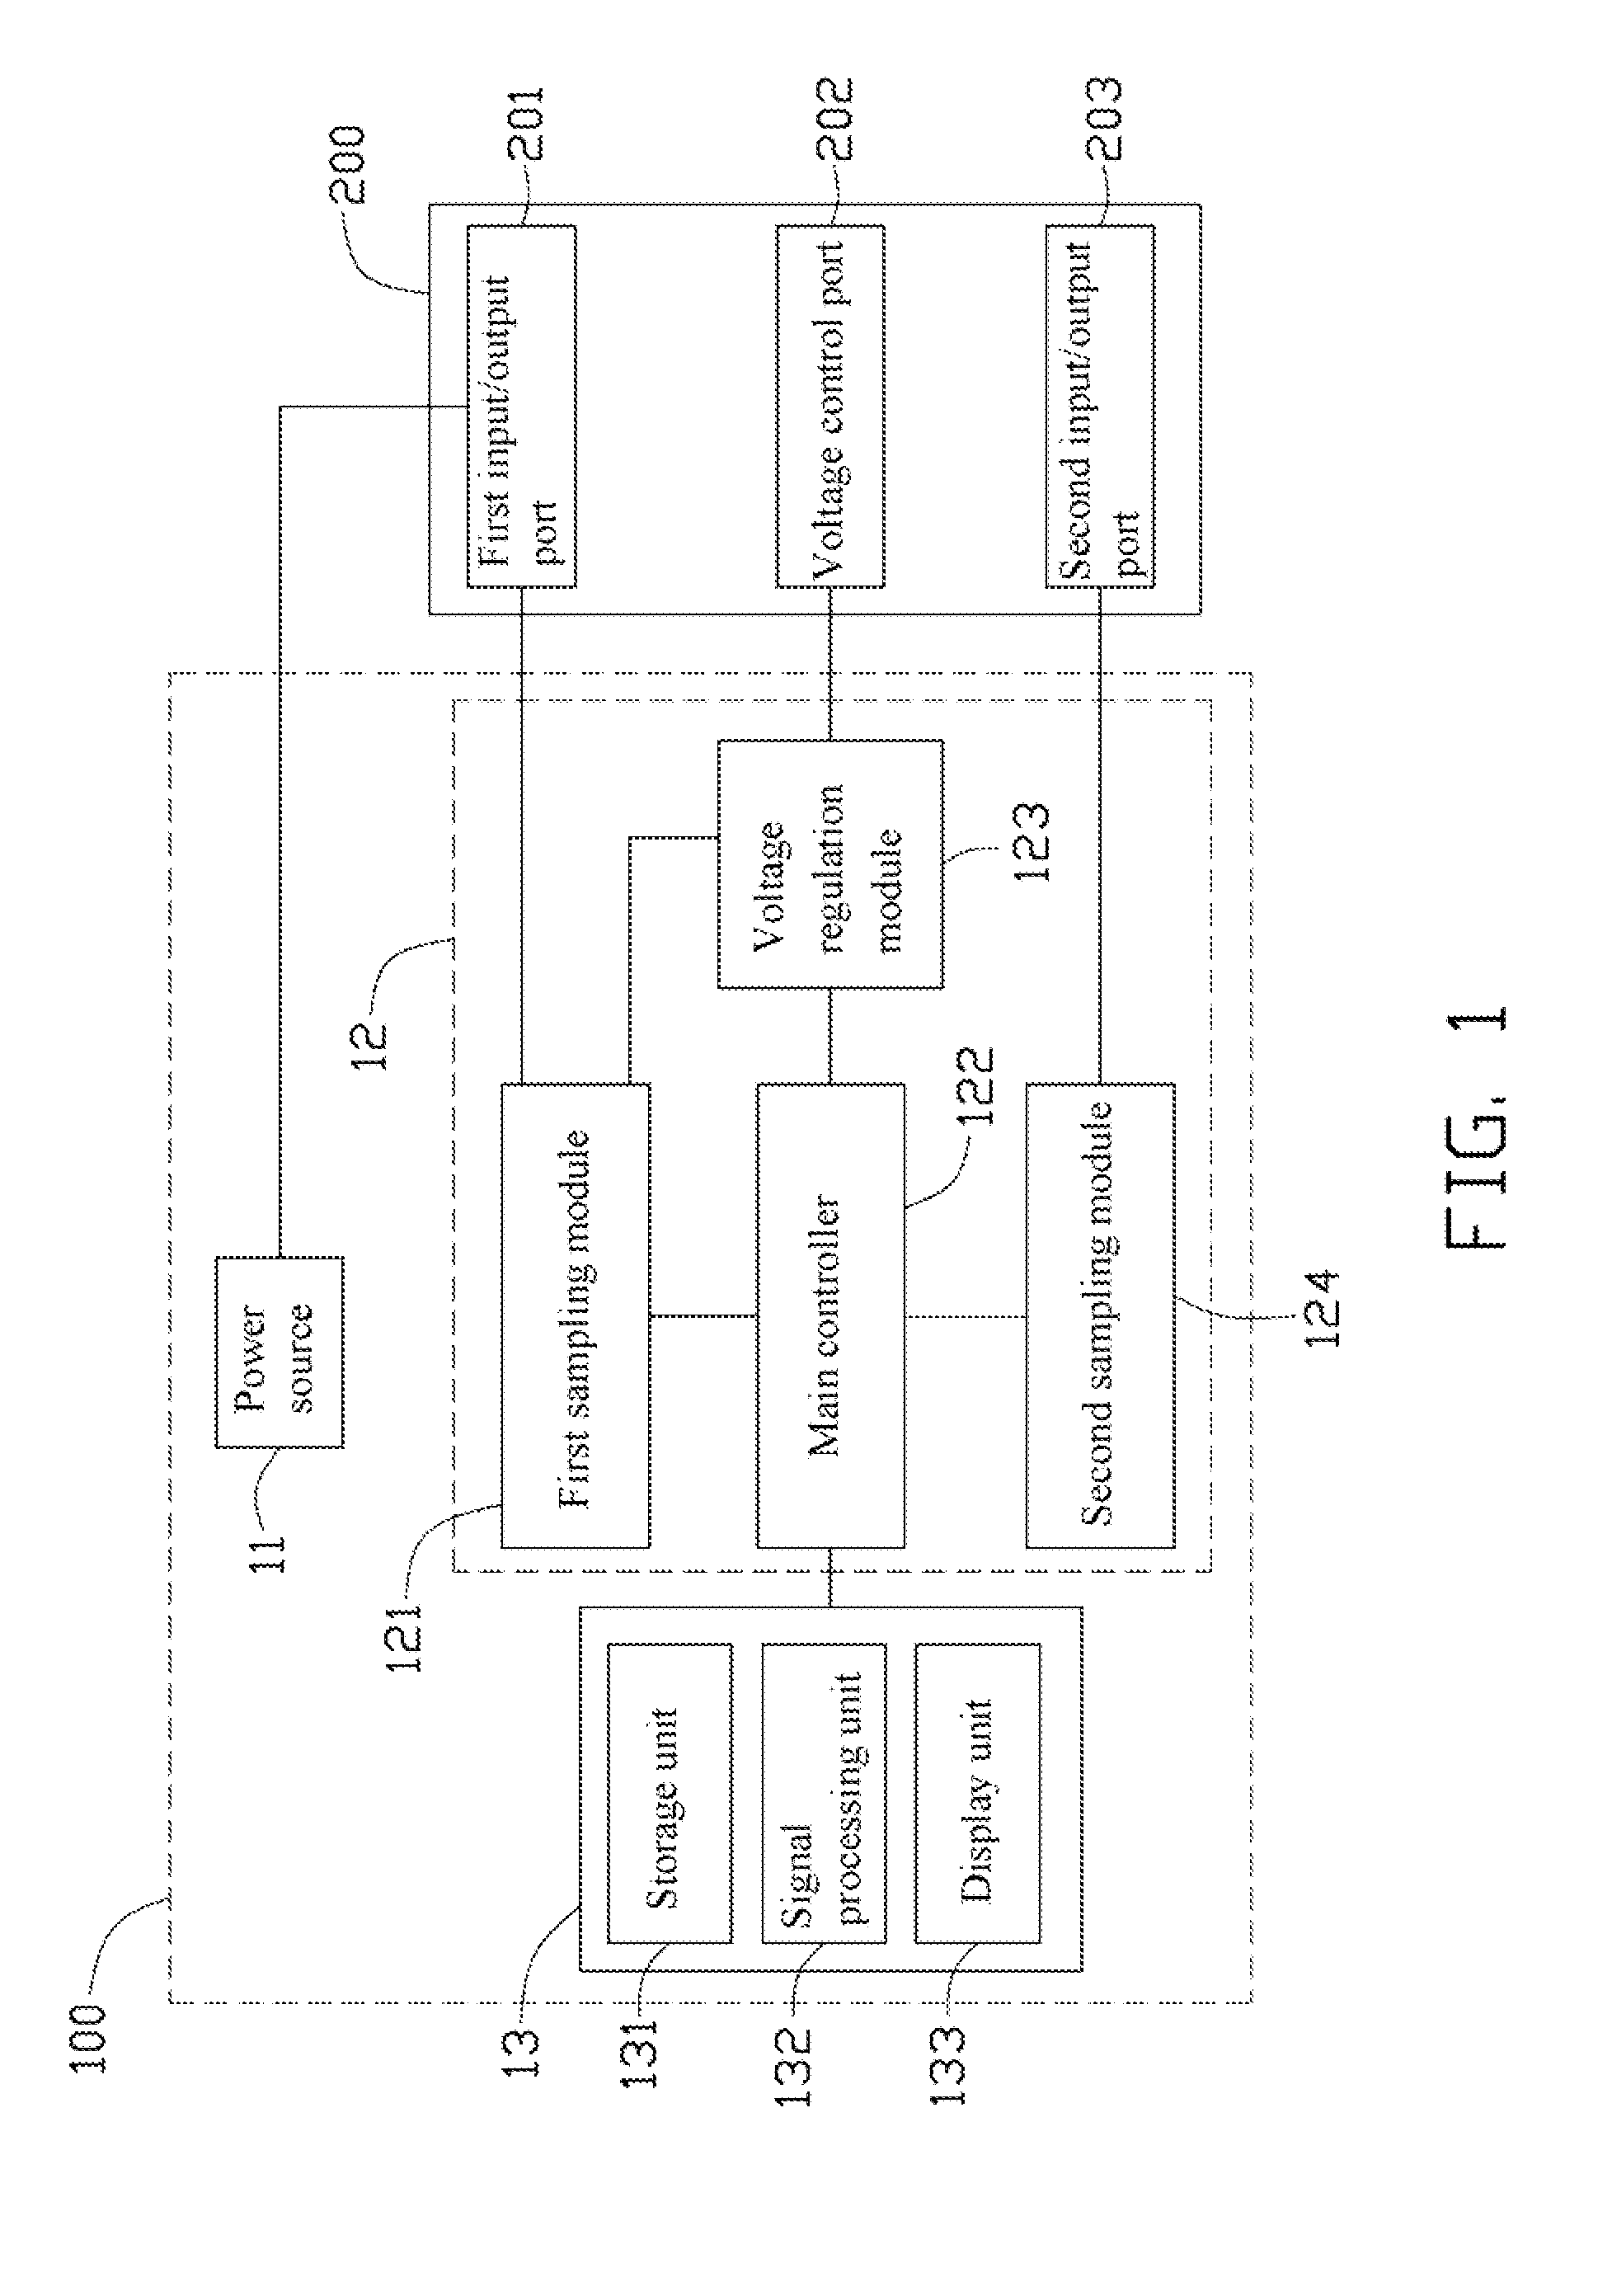 Voltage regulation device and system employing the same